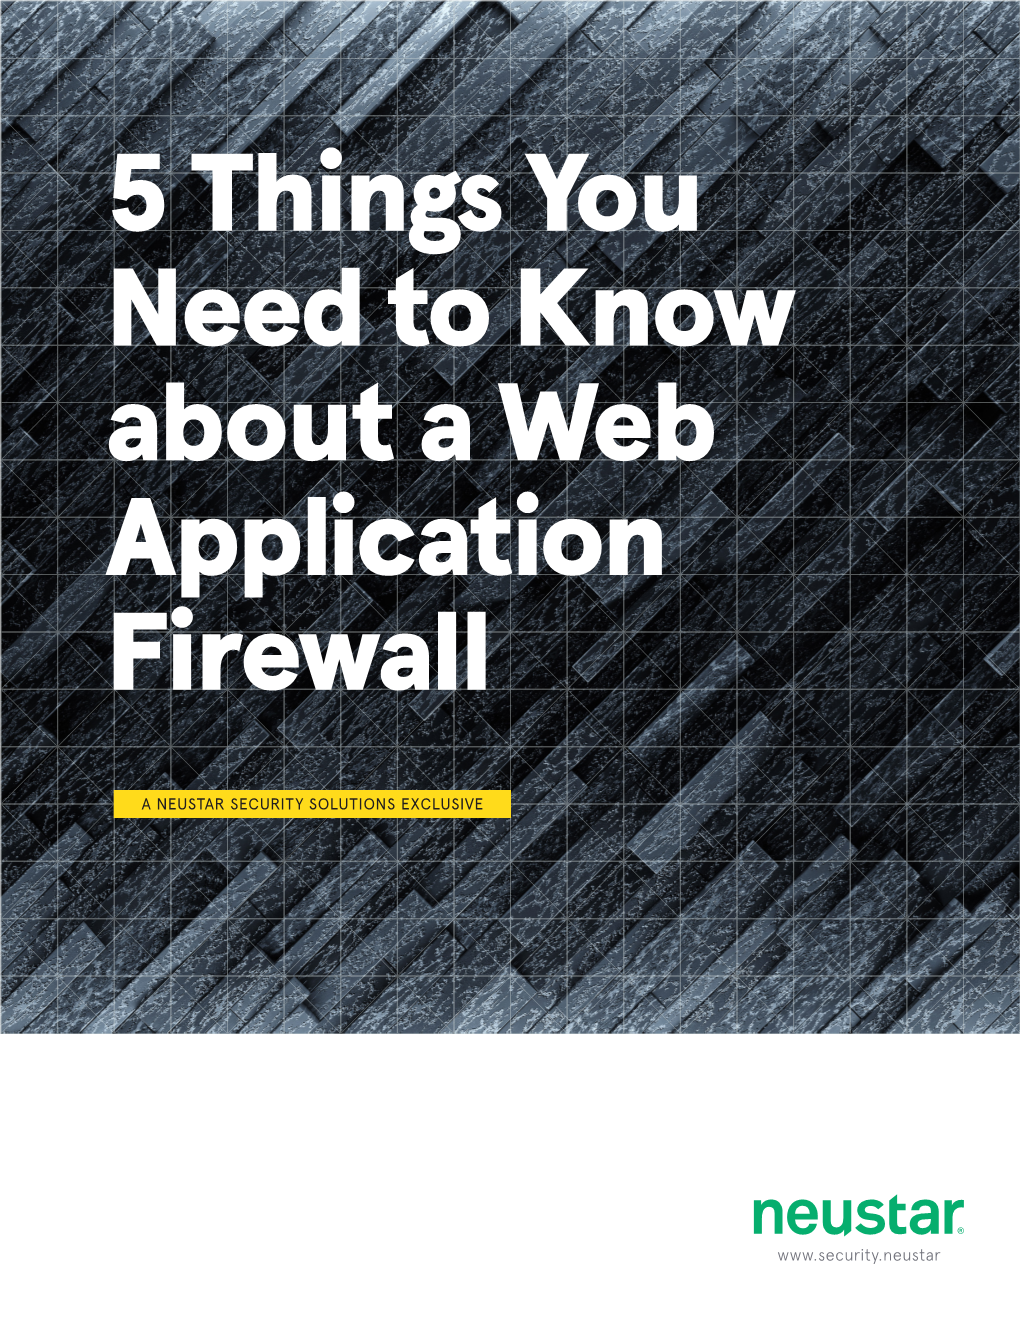 5 Things You Need to Know About a Web Application Firewall